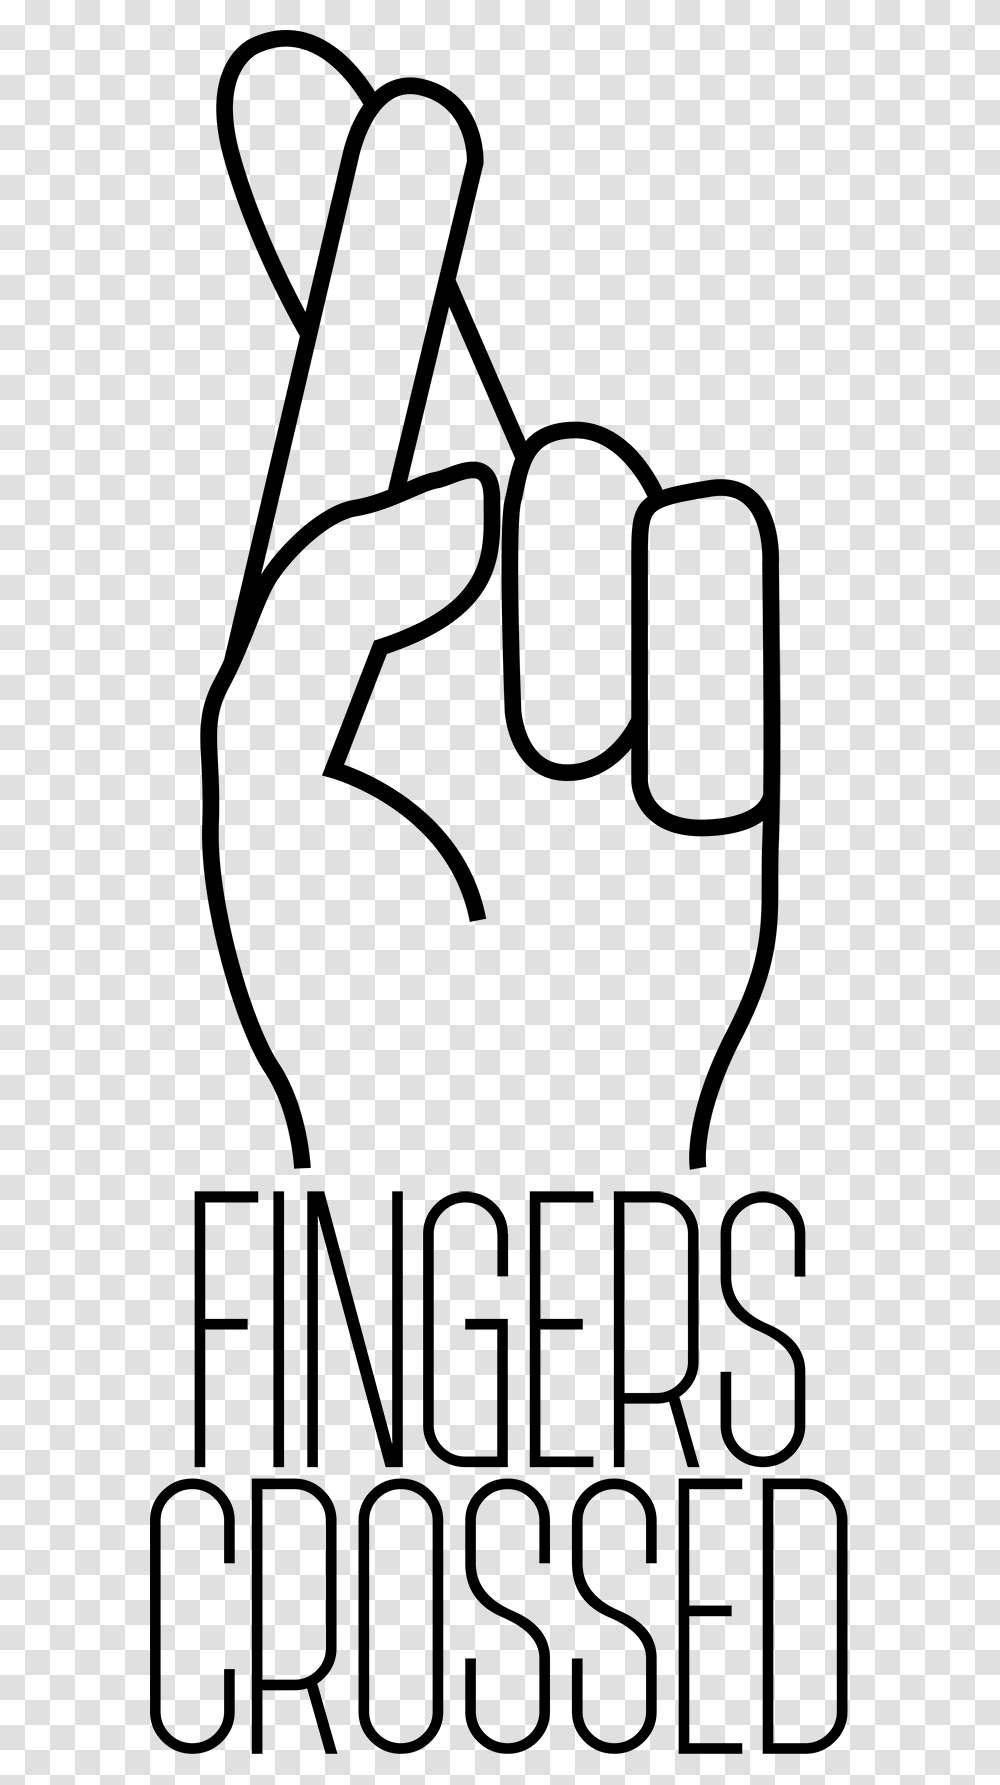 Fingers Crossed Cafe, Electronics, Screen, Monitor Transparent Png